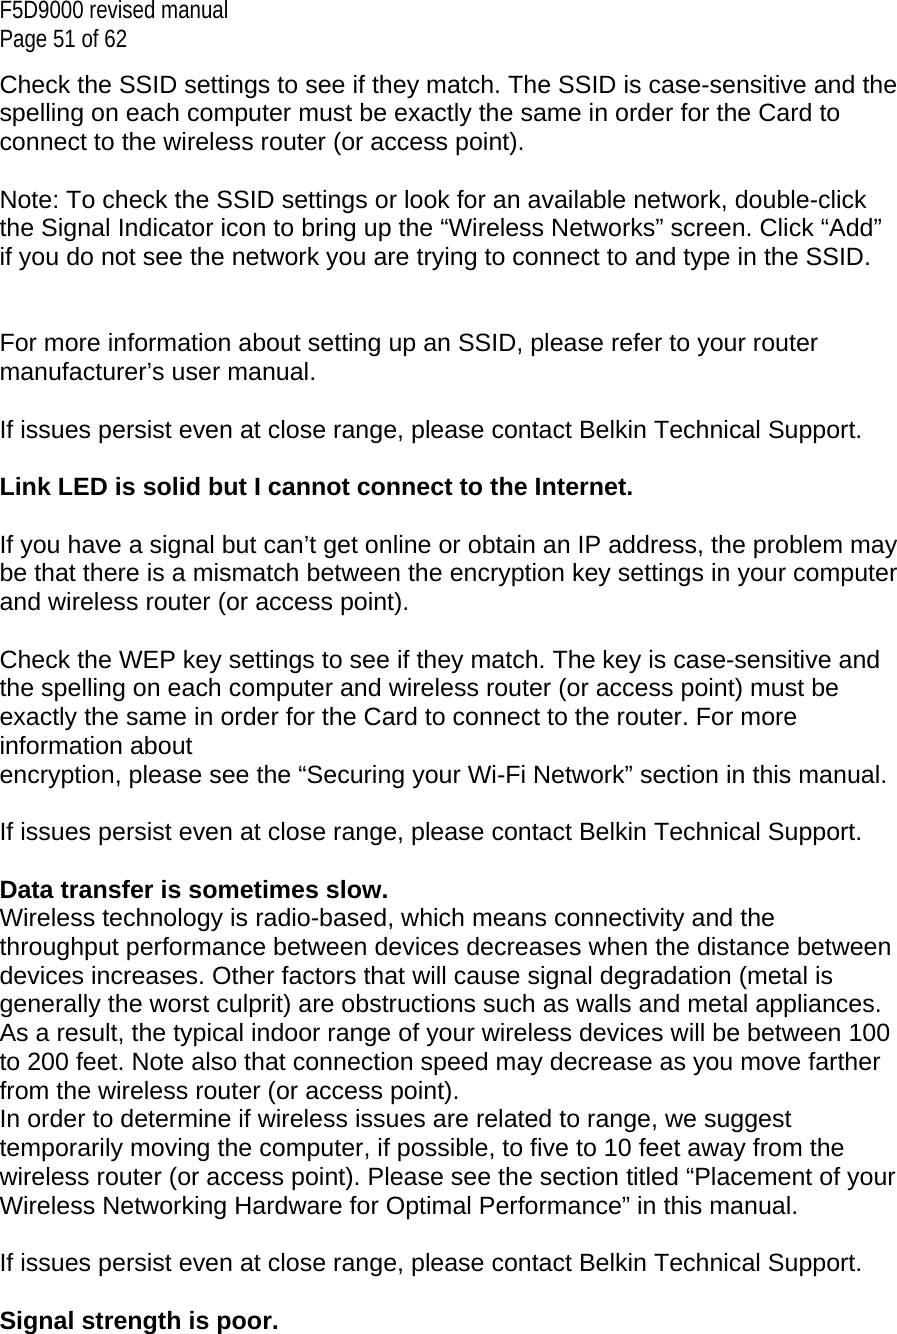 F5D9000 revised manual Page 51 of 62 Check the SSID settings to see if they match. The SSID is case-sensitive and the spelling on each computer must be exactly the same in order for the Card to connect to the wireless router (or access point).  Note: To check the SSID settings or look for an available network, double-click the Signal Indicator icon to bring up the “Wireless Networks” screen. Click “Add” if you do not see the network you are trying to connect to and type in the SSID.    For more information about setting up an SSID, please refer to your router manufacturer’s user manual.  If issues persist even at close range, please contact Belkin Technical Support.  Link LED is solid but I cannot connect to the Internet.  If you have a signal but can’t get online or obtain an IP address, the problem may be that there is a mismatch between the encryption key settings in your computer and wireless router (or access point).  Check the WEP key settings to see if they match. The key is case-sensitive and the spelling on each computer and wireless router (or access point) must be exactly the same in order for the Card to connect to the router. For more information about encryption, please see the “Securing your Wi-Fi Network” section in this manual.  If issues persist even at close range, please contact Belkin Technical Support.  Data transfer is sometimes slow. Wireless technology is radio-based, which means connectivity and the throughput performance between devices decreases when the distance between devices increases. Other factors that will cause signal degradation (metal is generally the worst culprit) are obstructions such as walls and metal appliances. As a result, the typical indoor range of your wireless devices will be between 100 to 200 feet. Note also that connection speed may decrease as you move farther from the wireless router (or access point). In order to determine if wireless issues are related to range, we suggest temporarily moving the computer, if possible, to five to 10 feet away from the wireless router (or access point). Please see the section titled “Placement of your Wireless Networking Hardware for Optimal Performance” in this manual.   If issues persist even at close range, please contact Belkin Technical Support.  Signal strength is poor.  